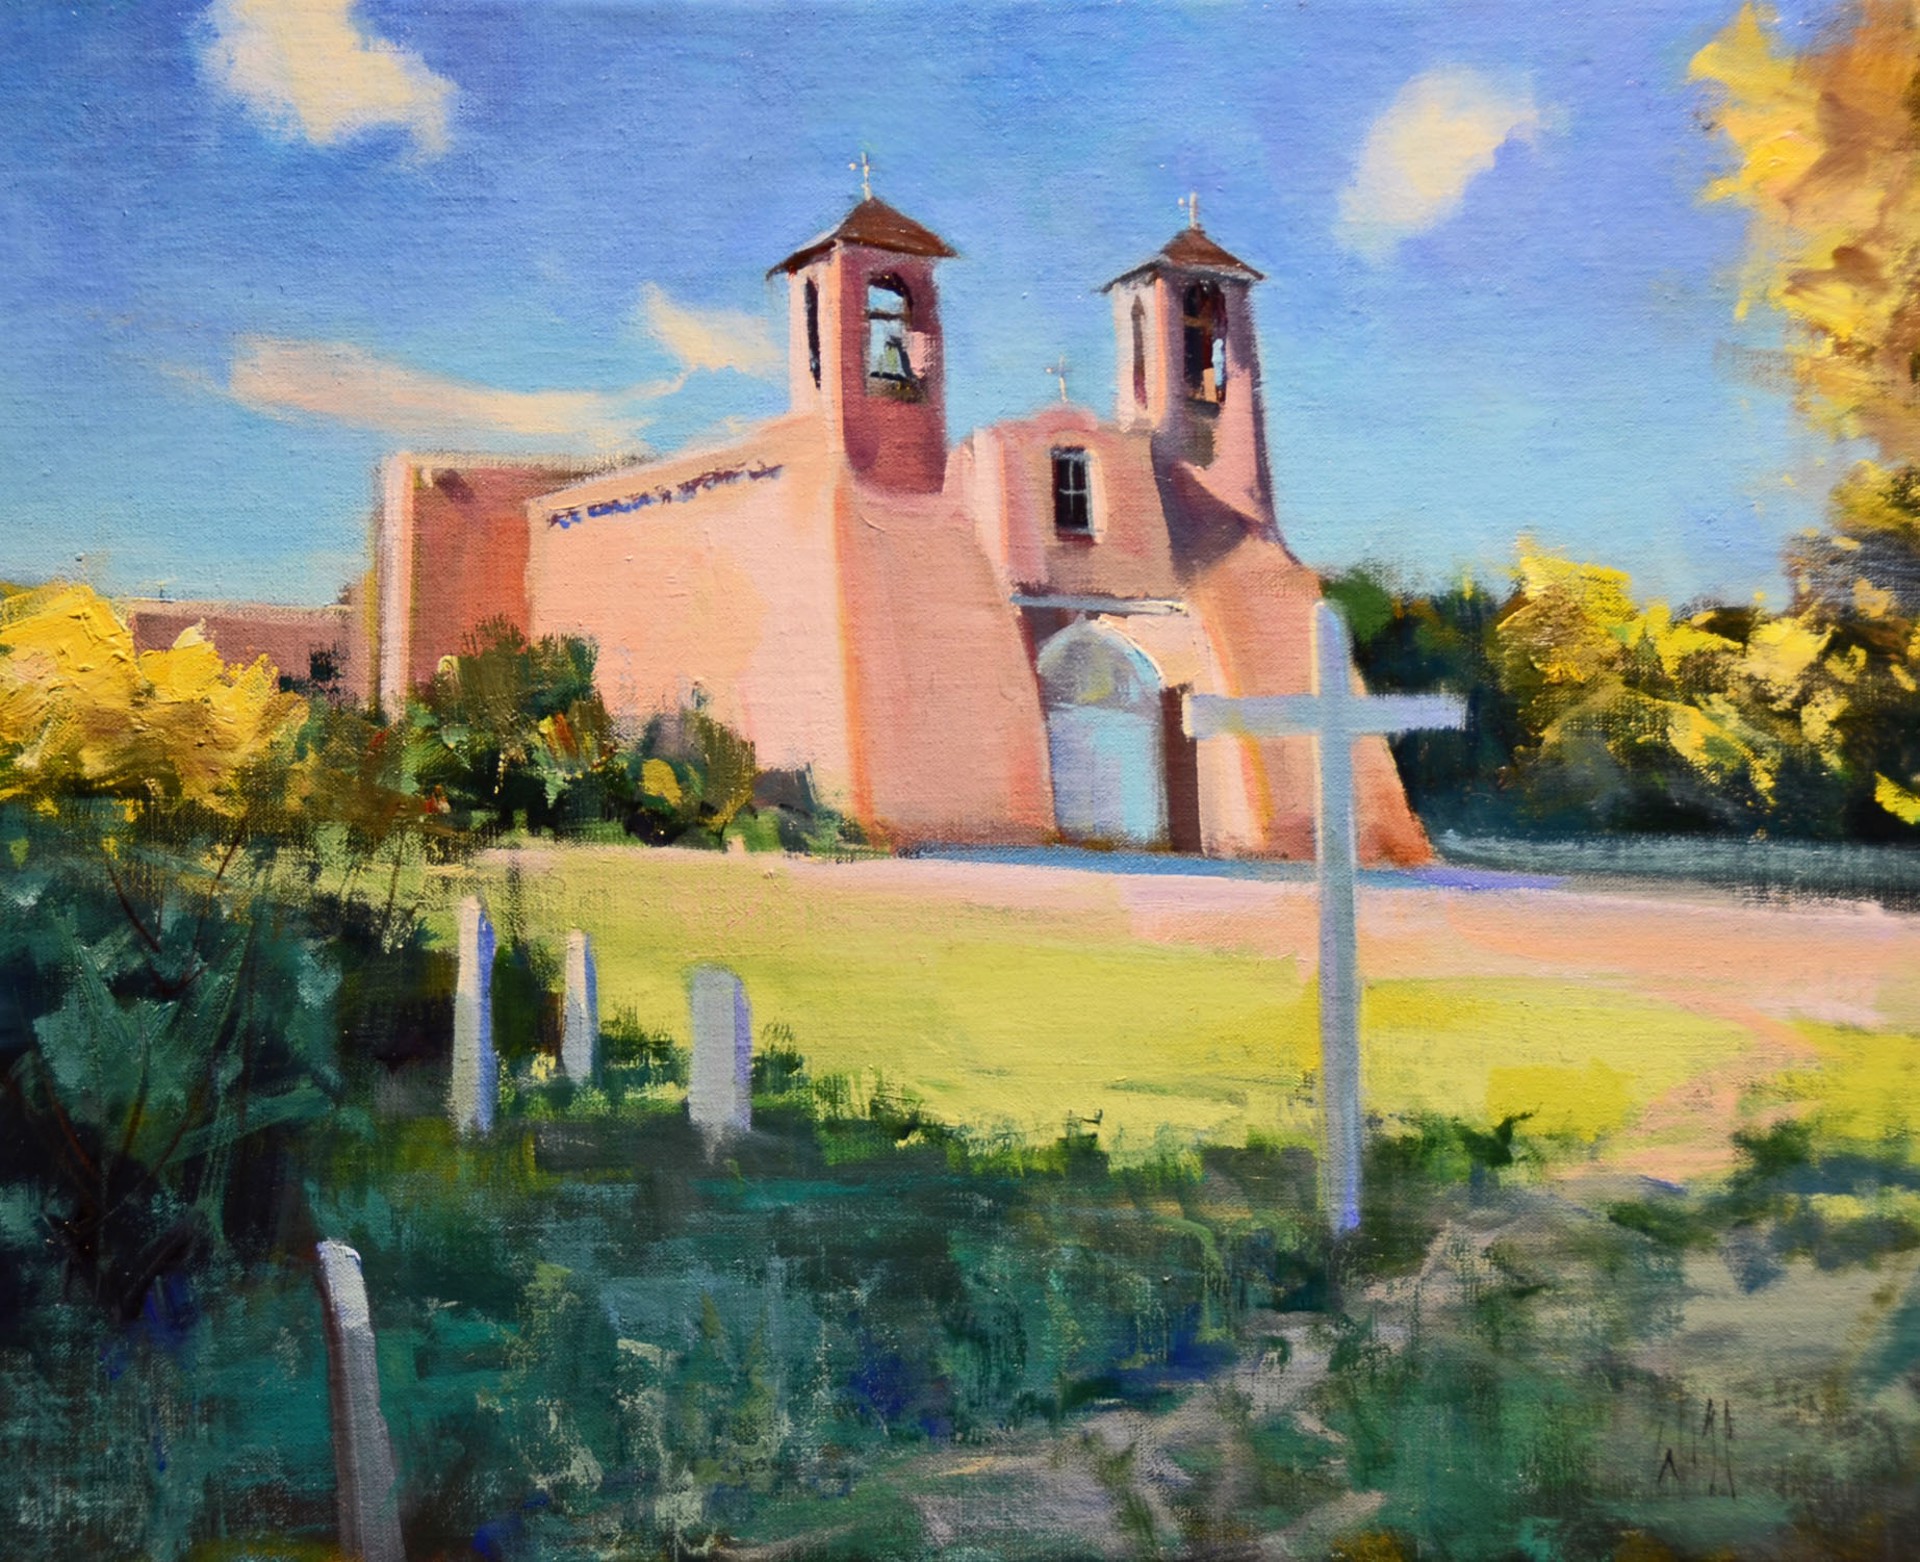 San Francisco de Asis by Mike Wise